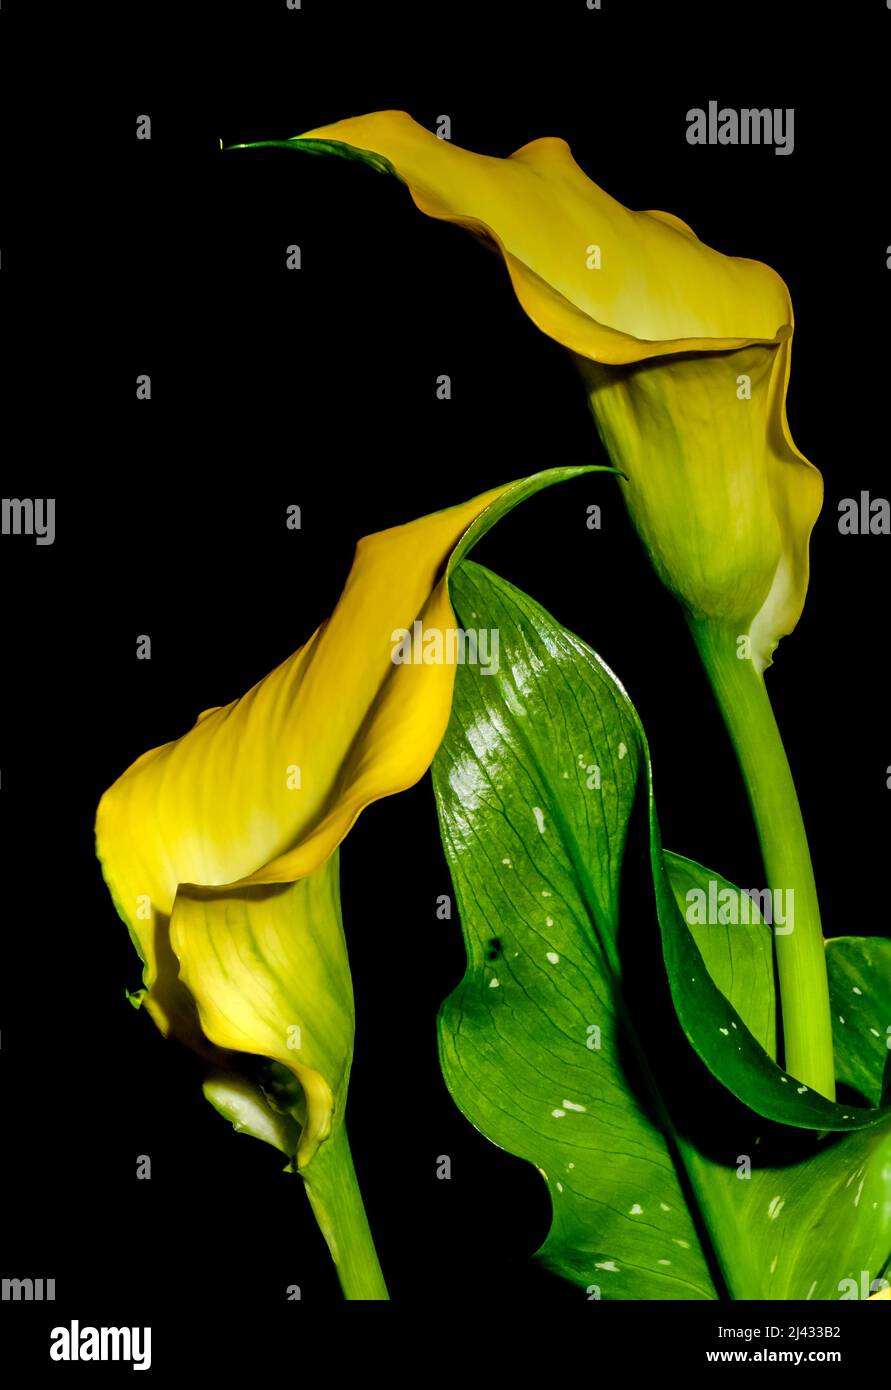 calla, zantedeschia, decorative yellow flower on a black background, speckled white spots on the leaves, macro Stock Photo